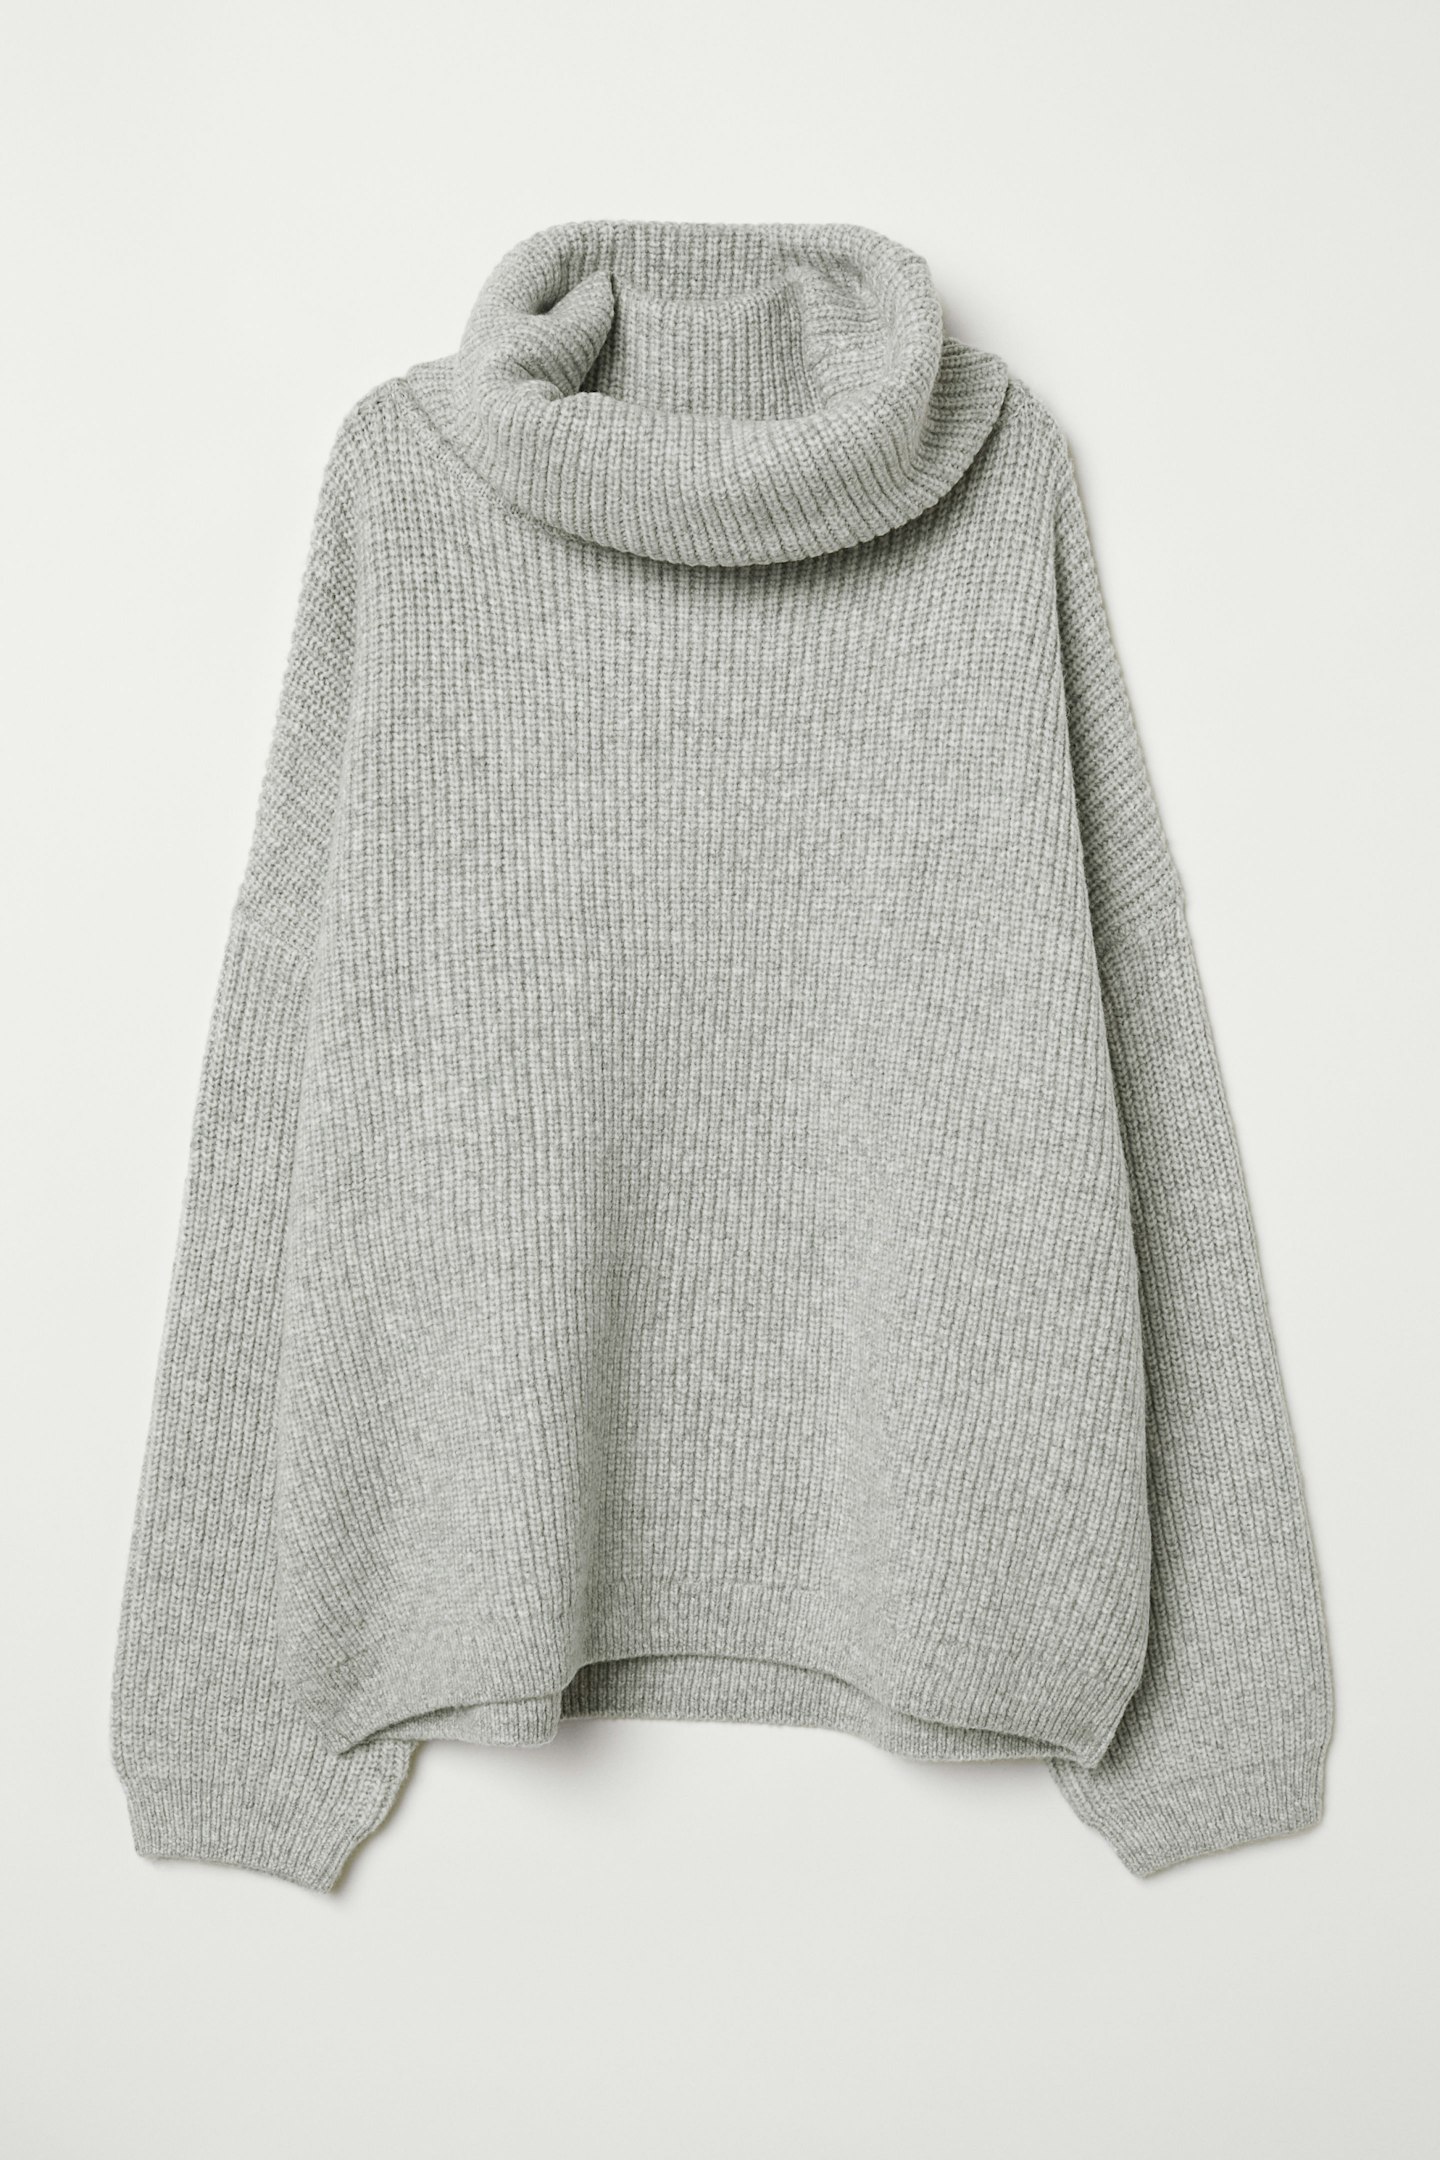 H&M, Ribbed Polo-Neck Jumper.u00a0£34.99